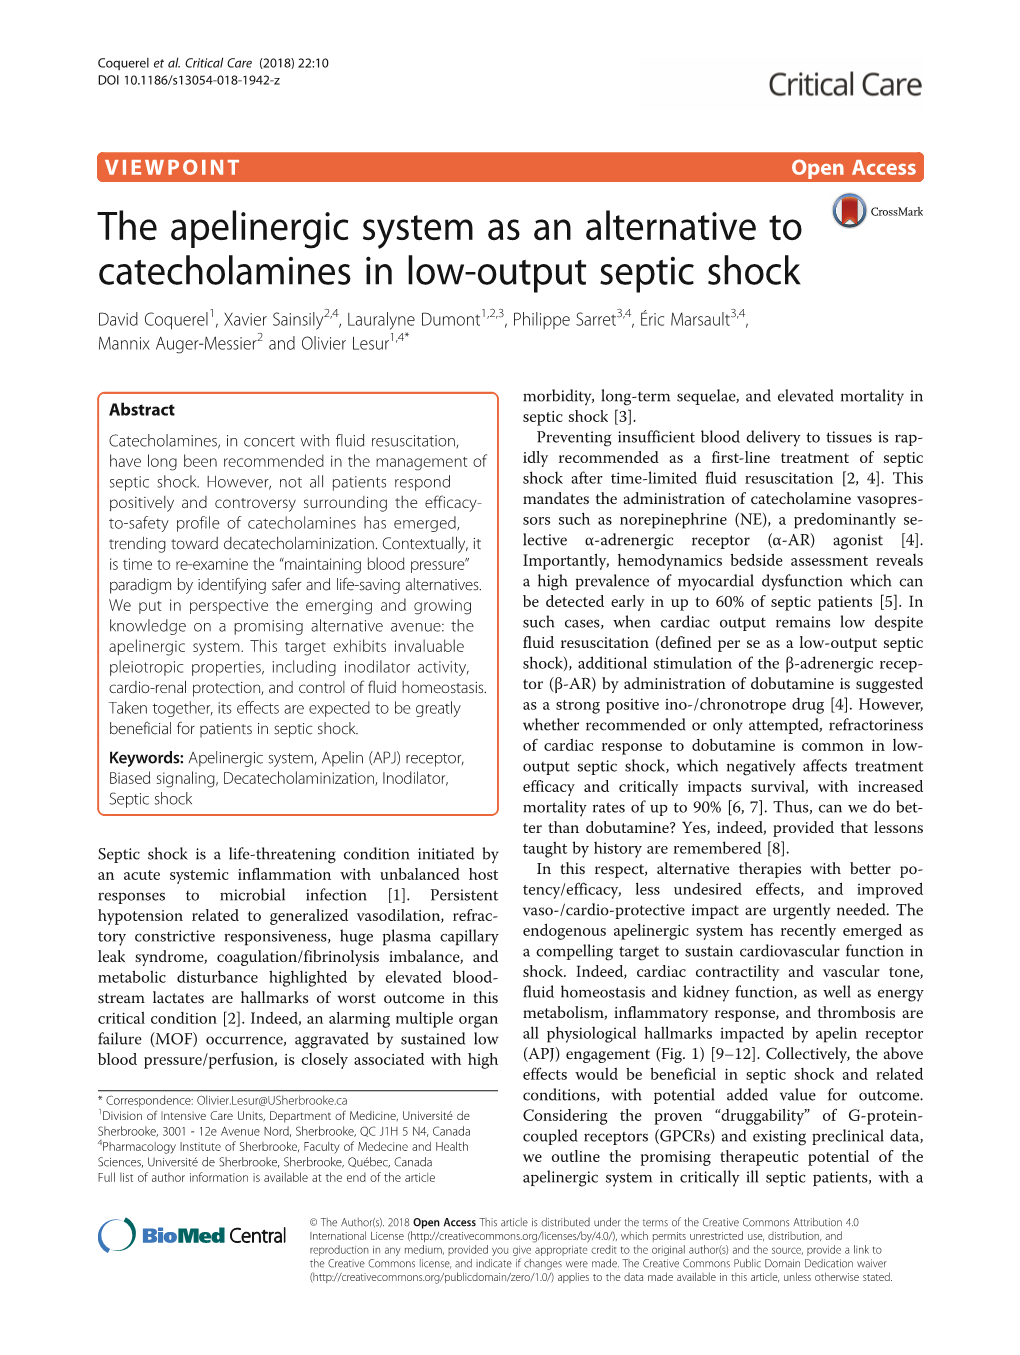 The Apelinergic System As an Alternative to Catecholamines in Low